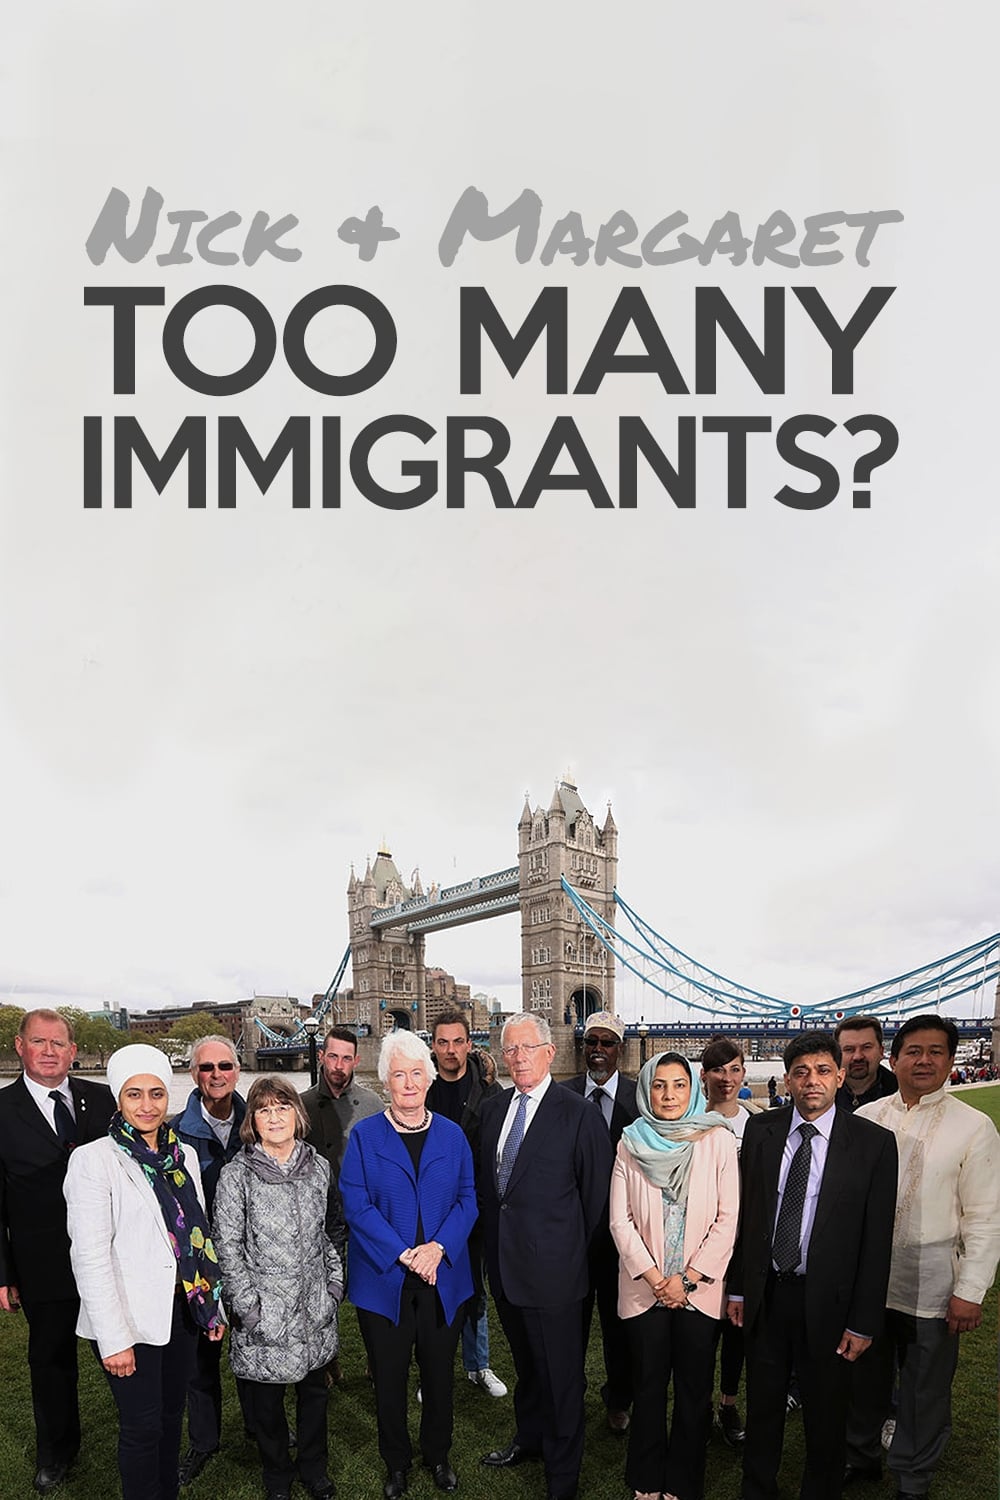 Nick and Margaret: Too Many Immigrants? TV Shows About Xenophobia